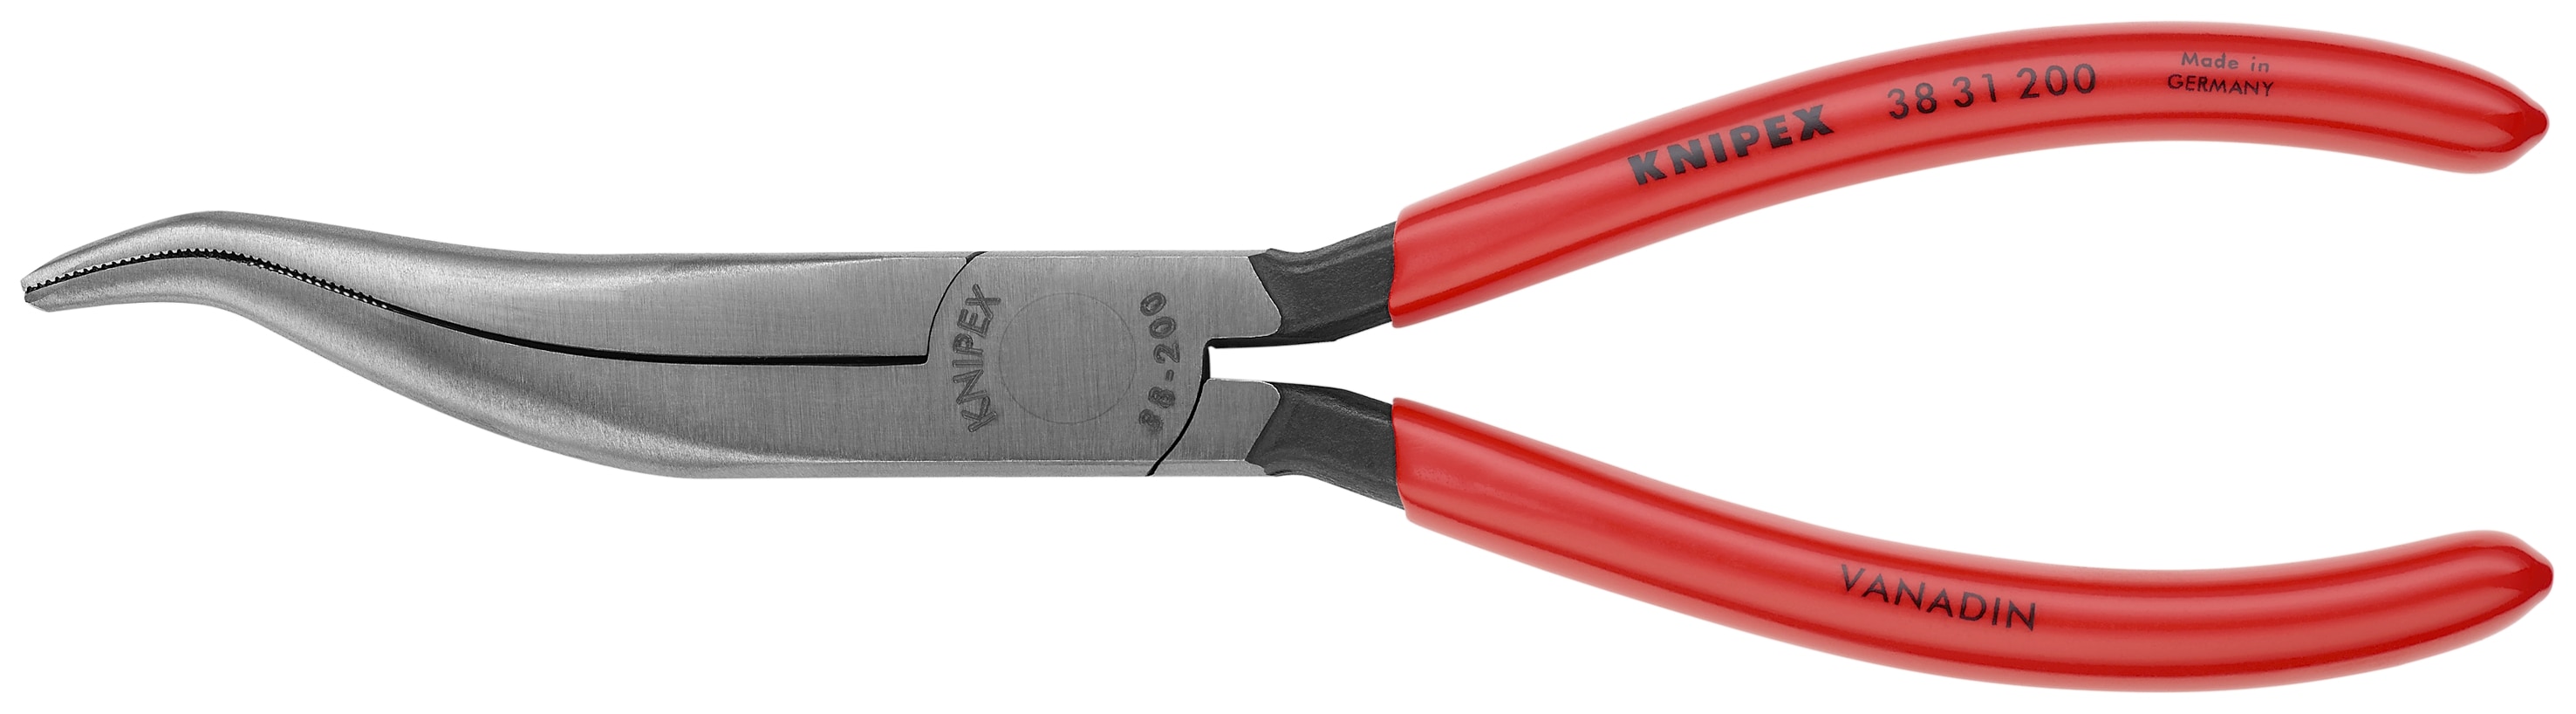 Knipex Long Nose Plier Set,Dipped,3 Pcs. 9K 00 80 12 US, 1 - Smith's Food  and Drug